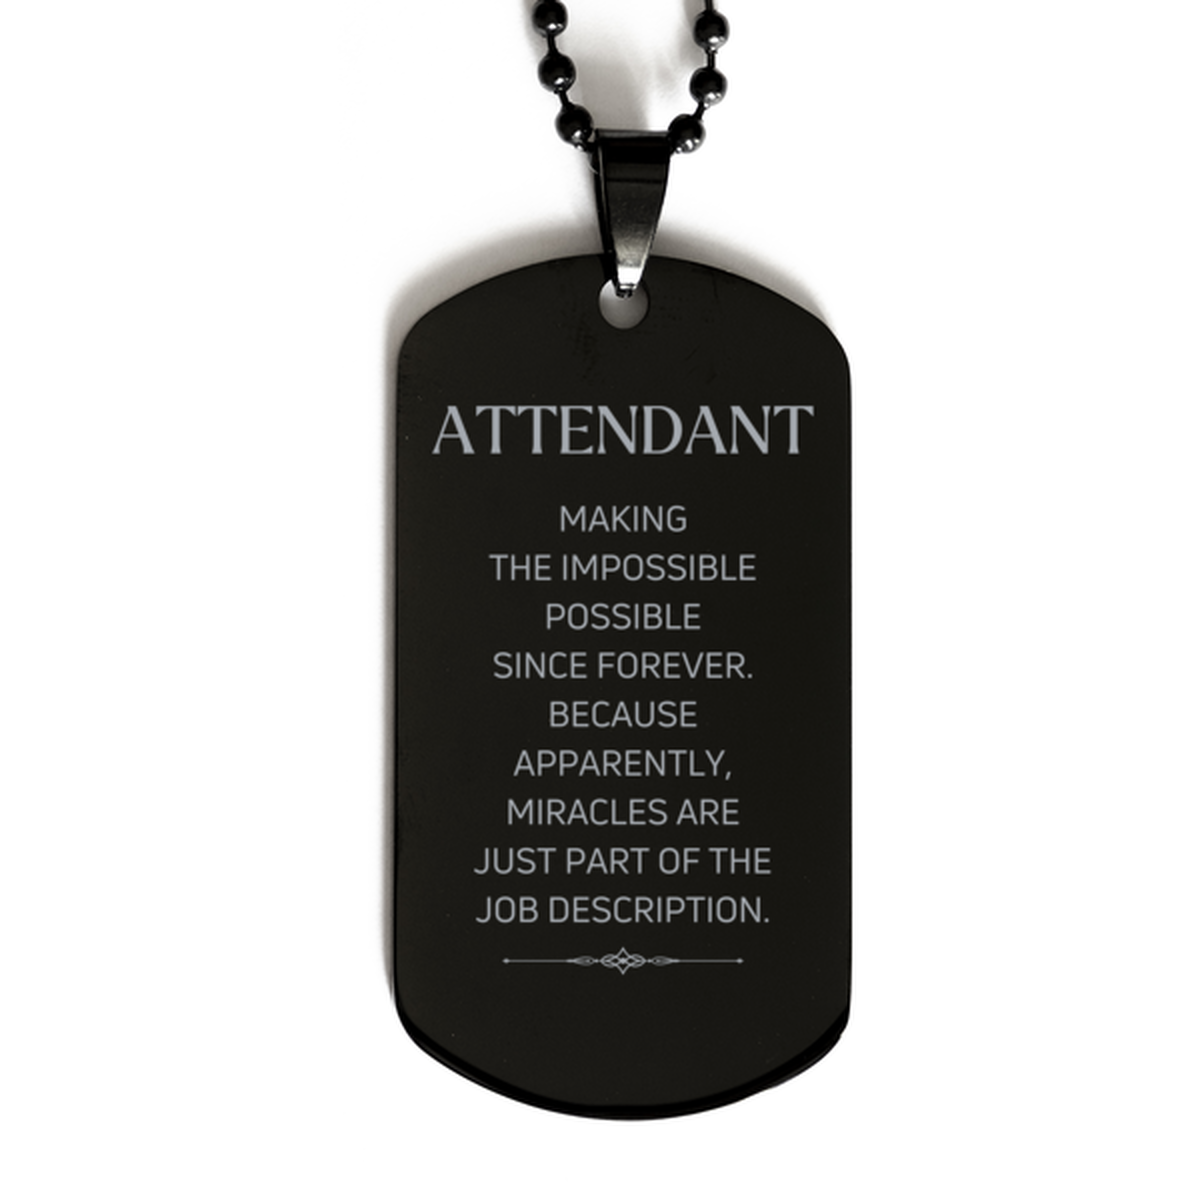 Funny Attendant Gifts, Miracles are just part of the job description, Inspirational Birthday Black Dog Tag For Attendant, Men, Women, Coworkers, Friends, Boss